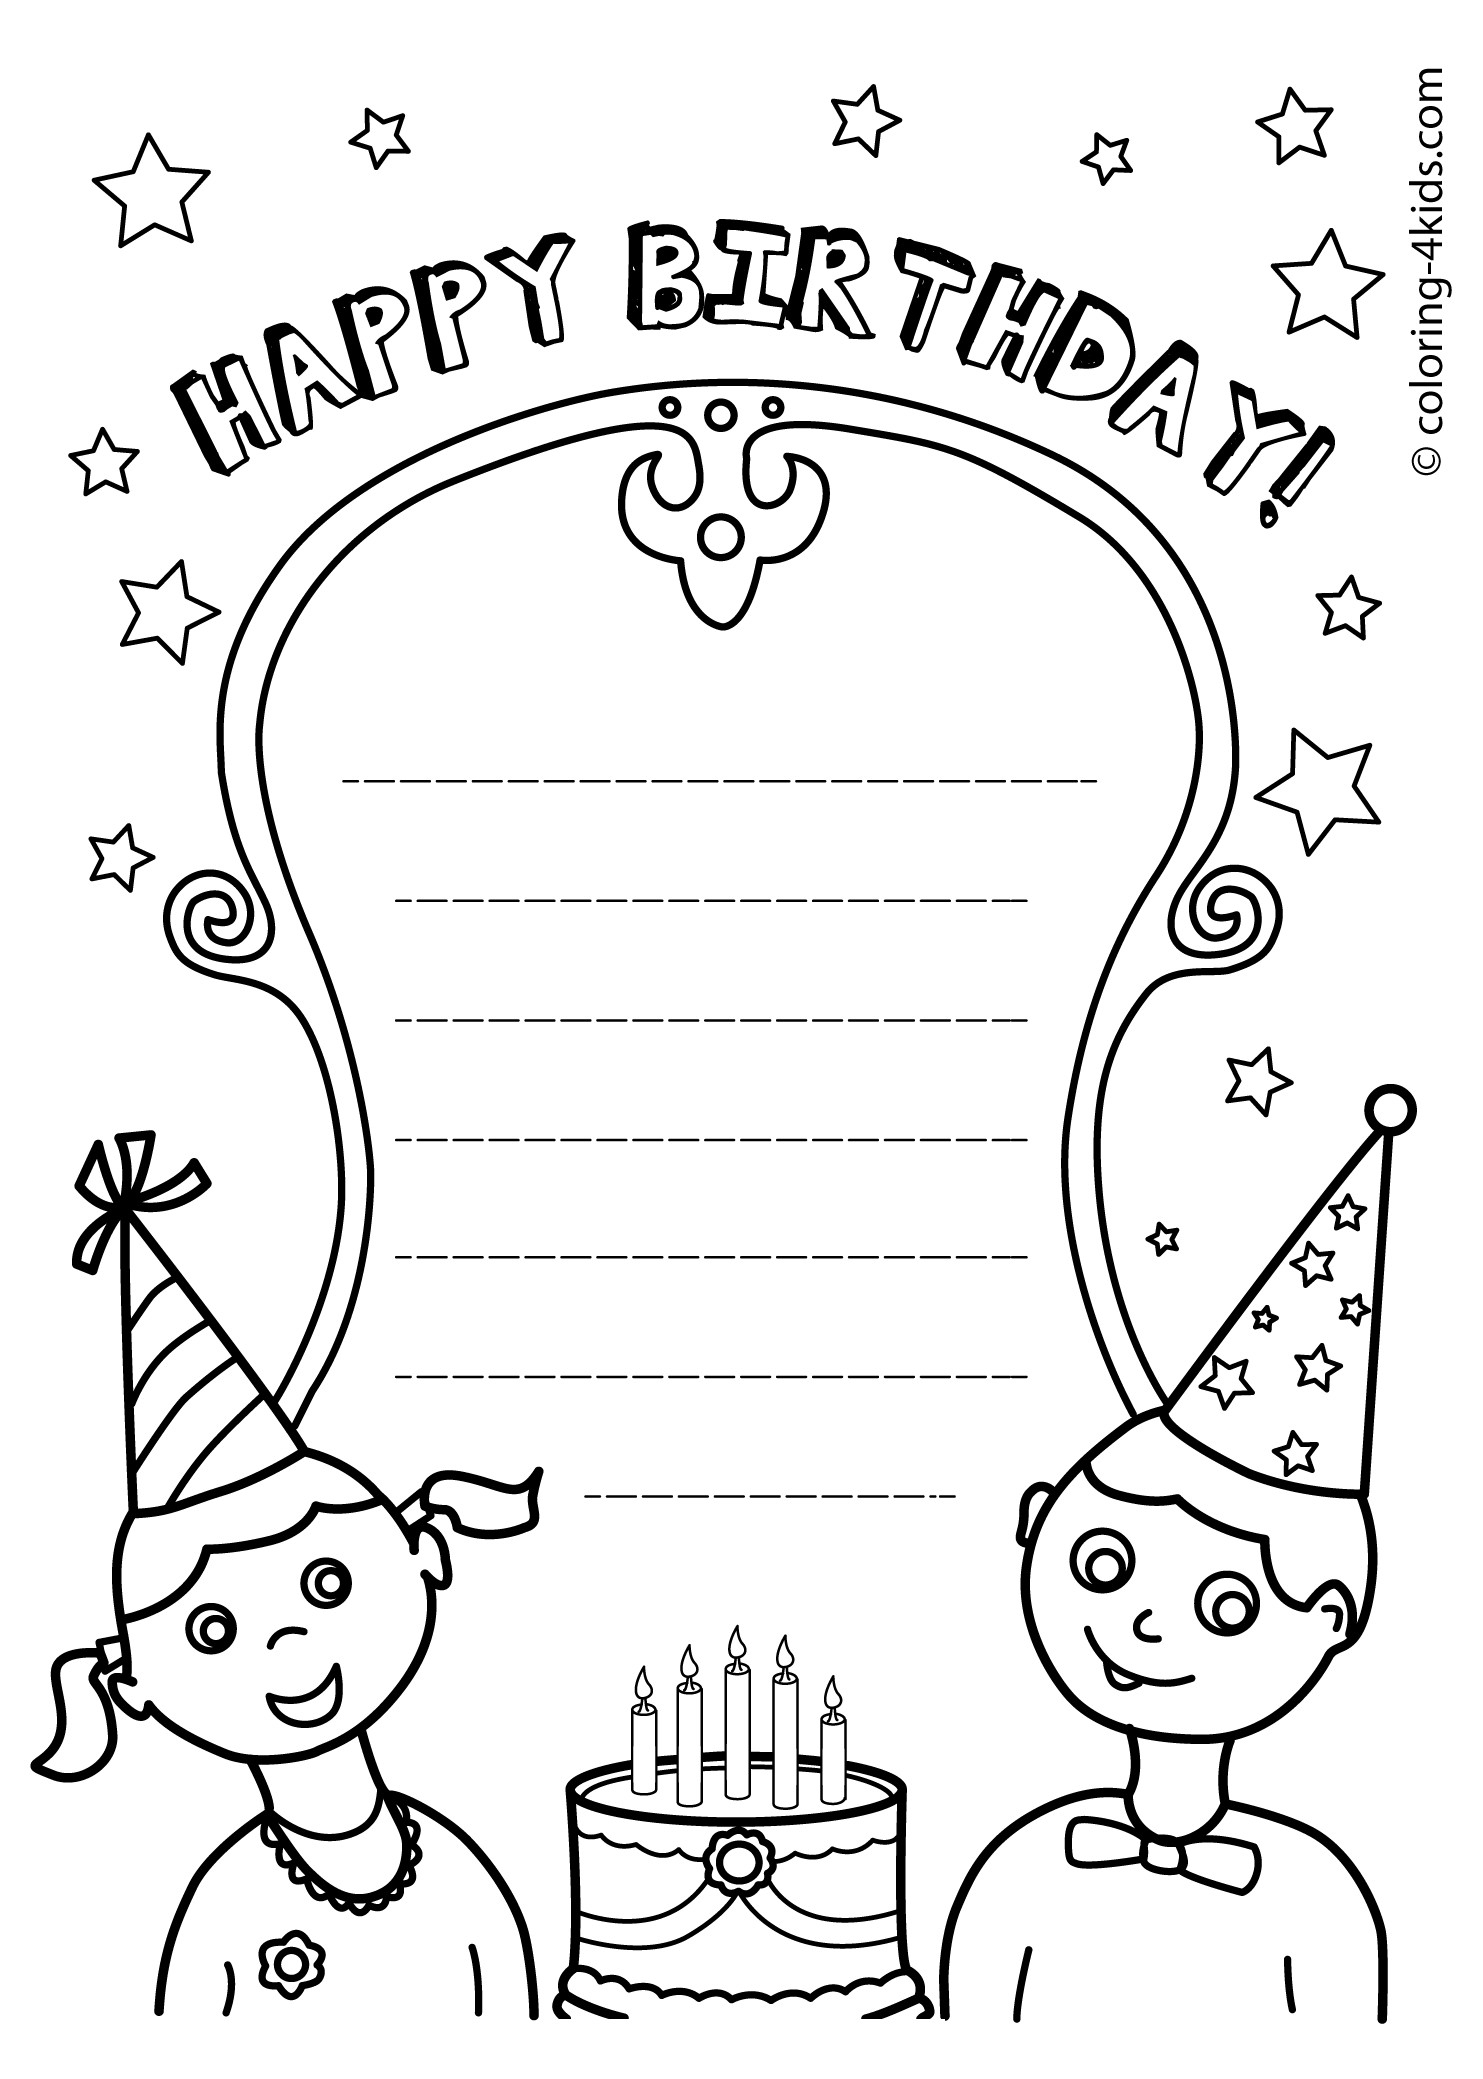 Happy Birthday Coloring Pages To Print Happy Birthday Printable Coloring Pages Pathtalk